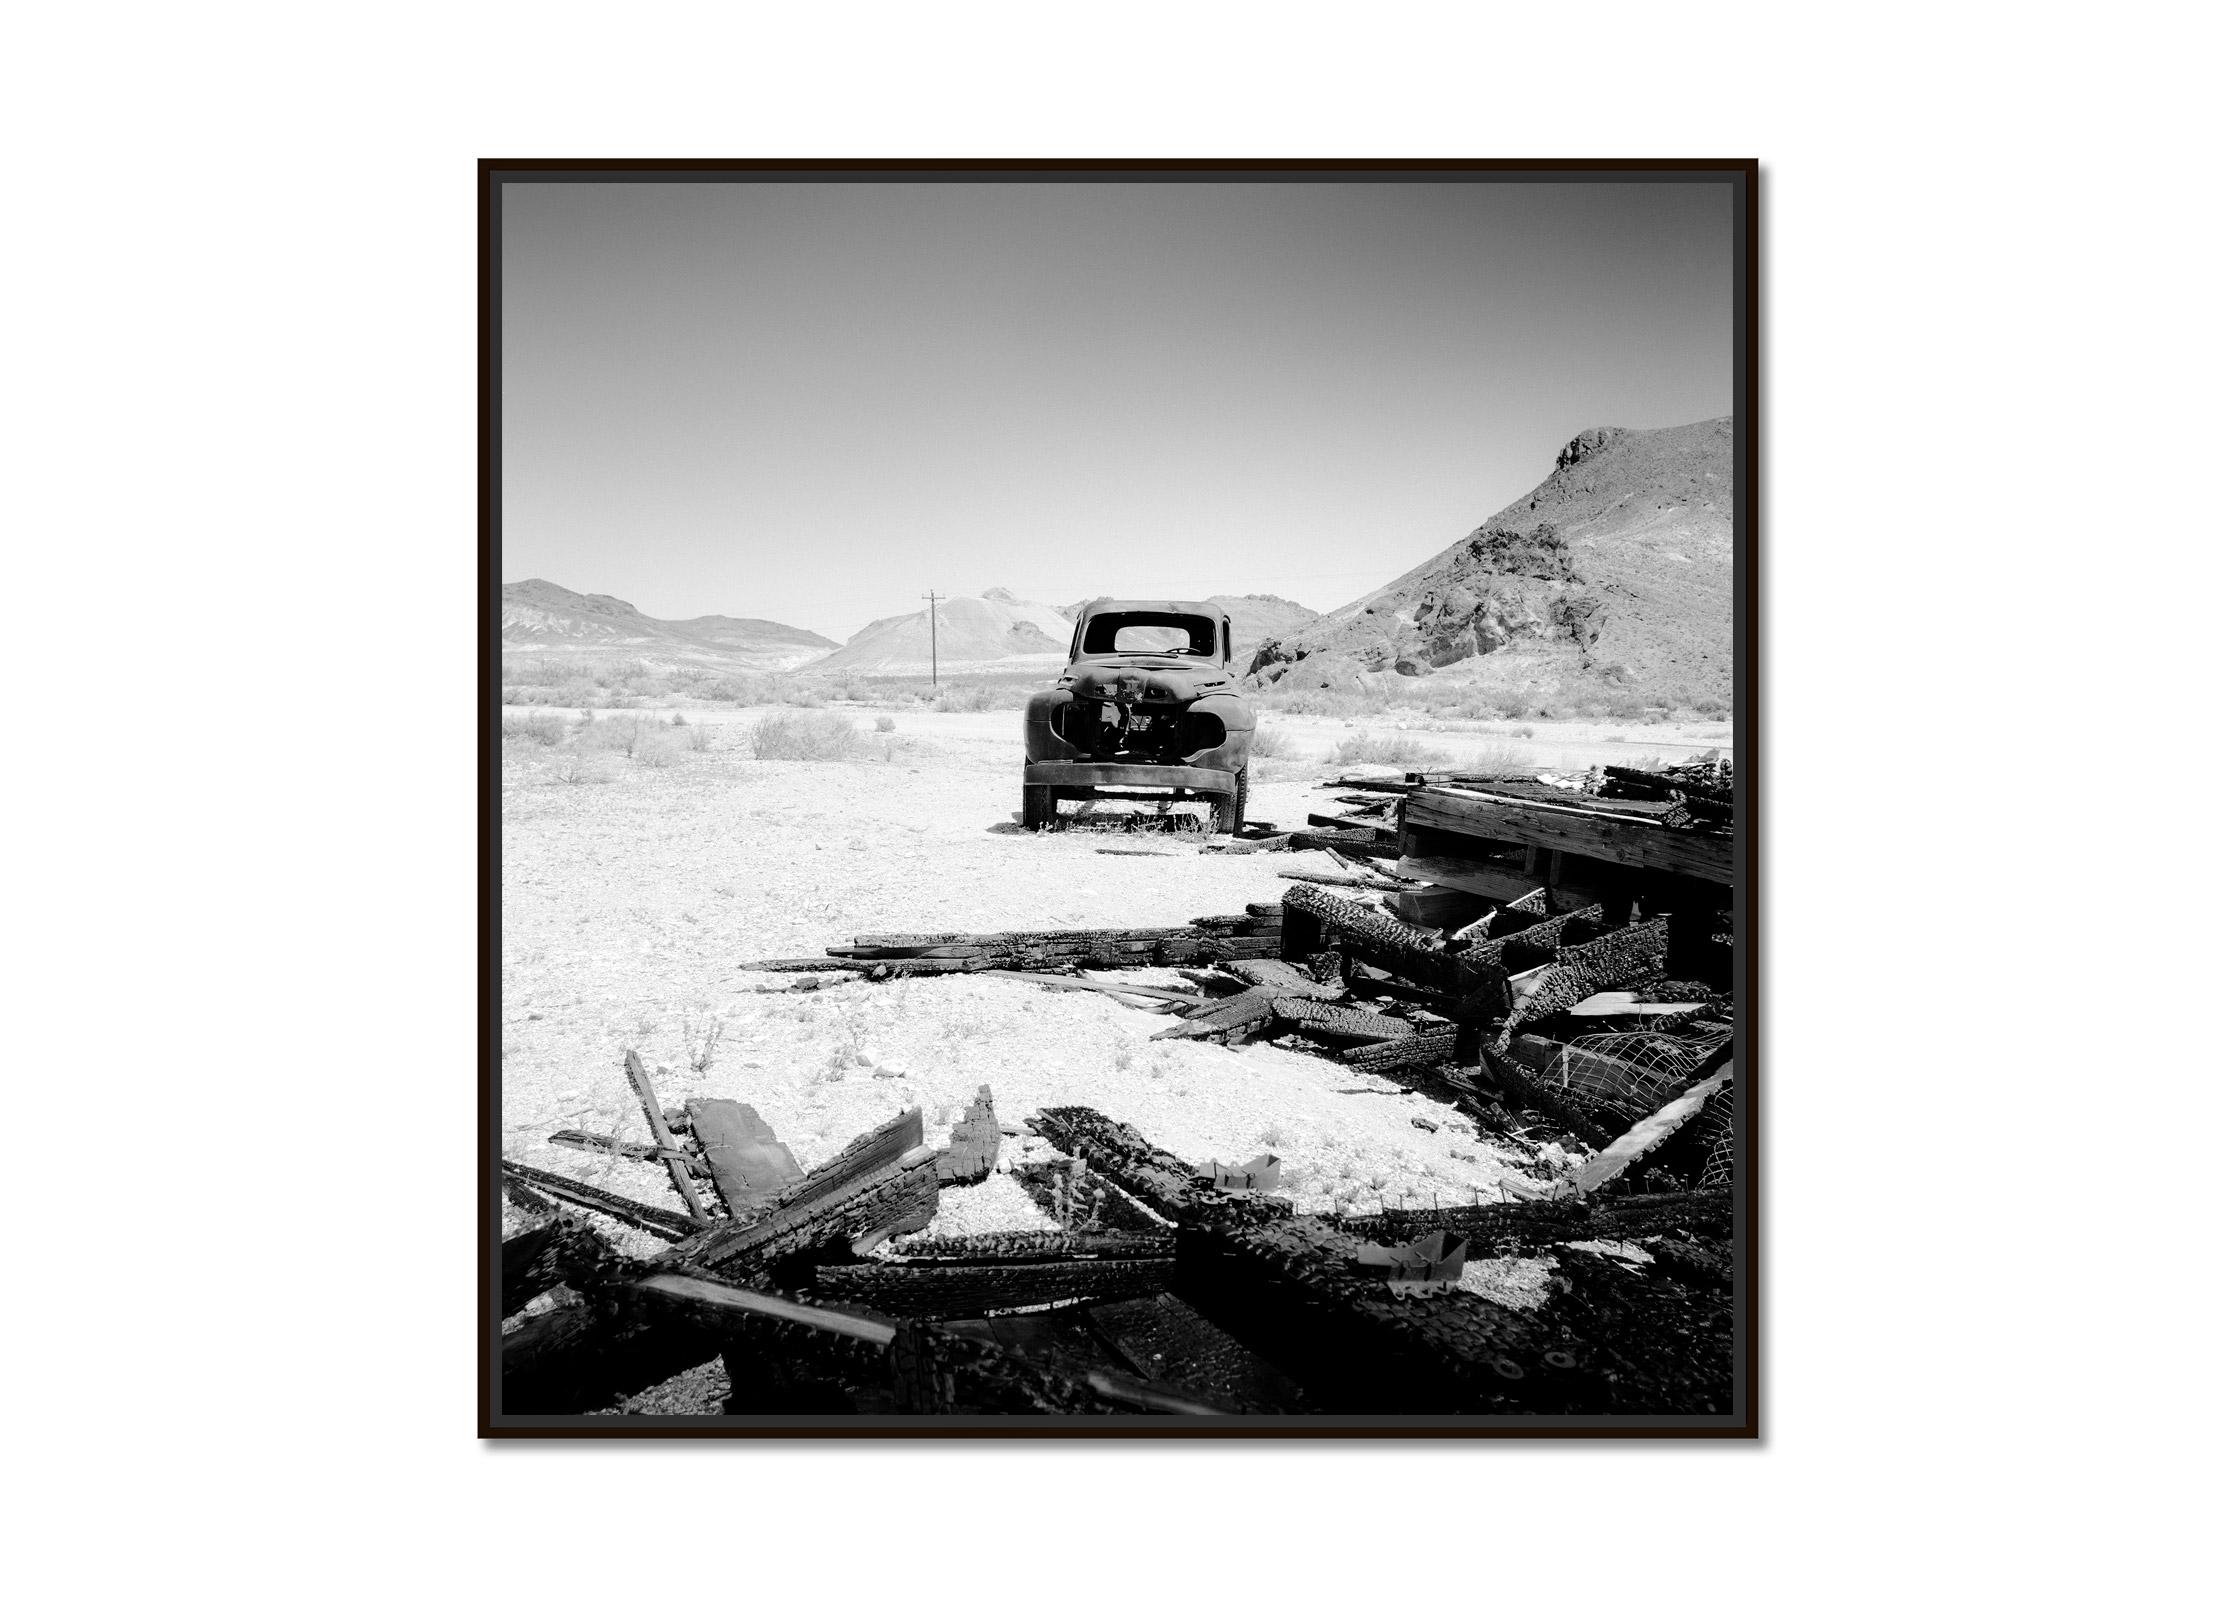 Burnt Down, Old US Car, California, black and white photography, art landscape - Photograph by Gerald Berghammer